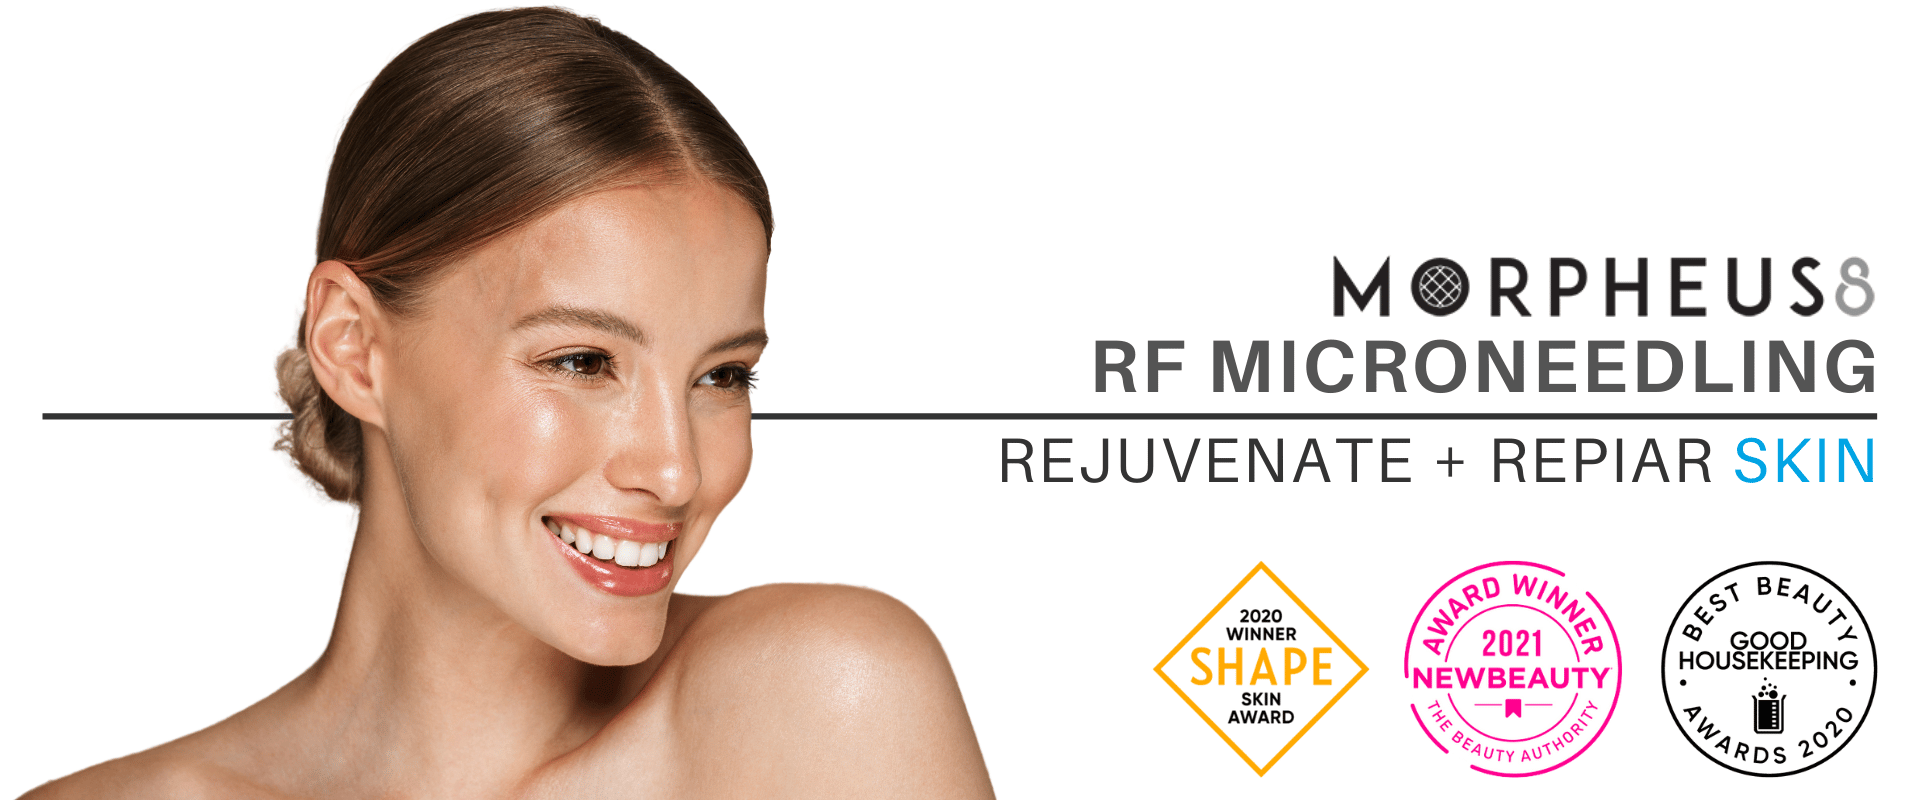 woman with a clear face promoting RF Microneedling with Morpheus8